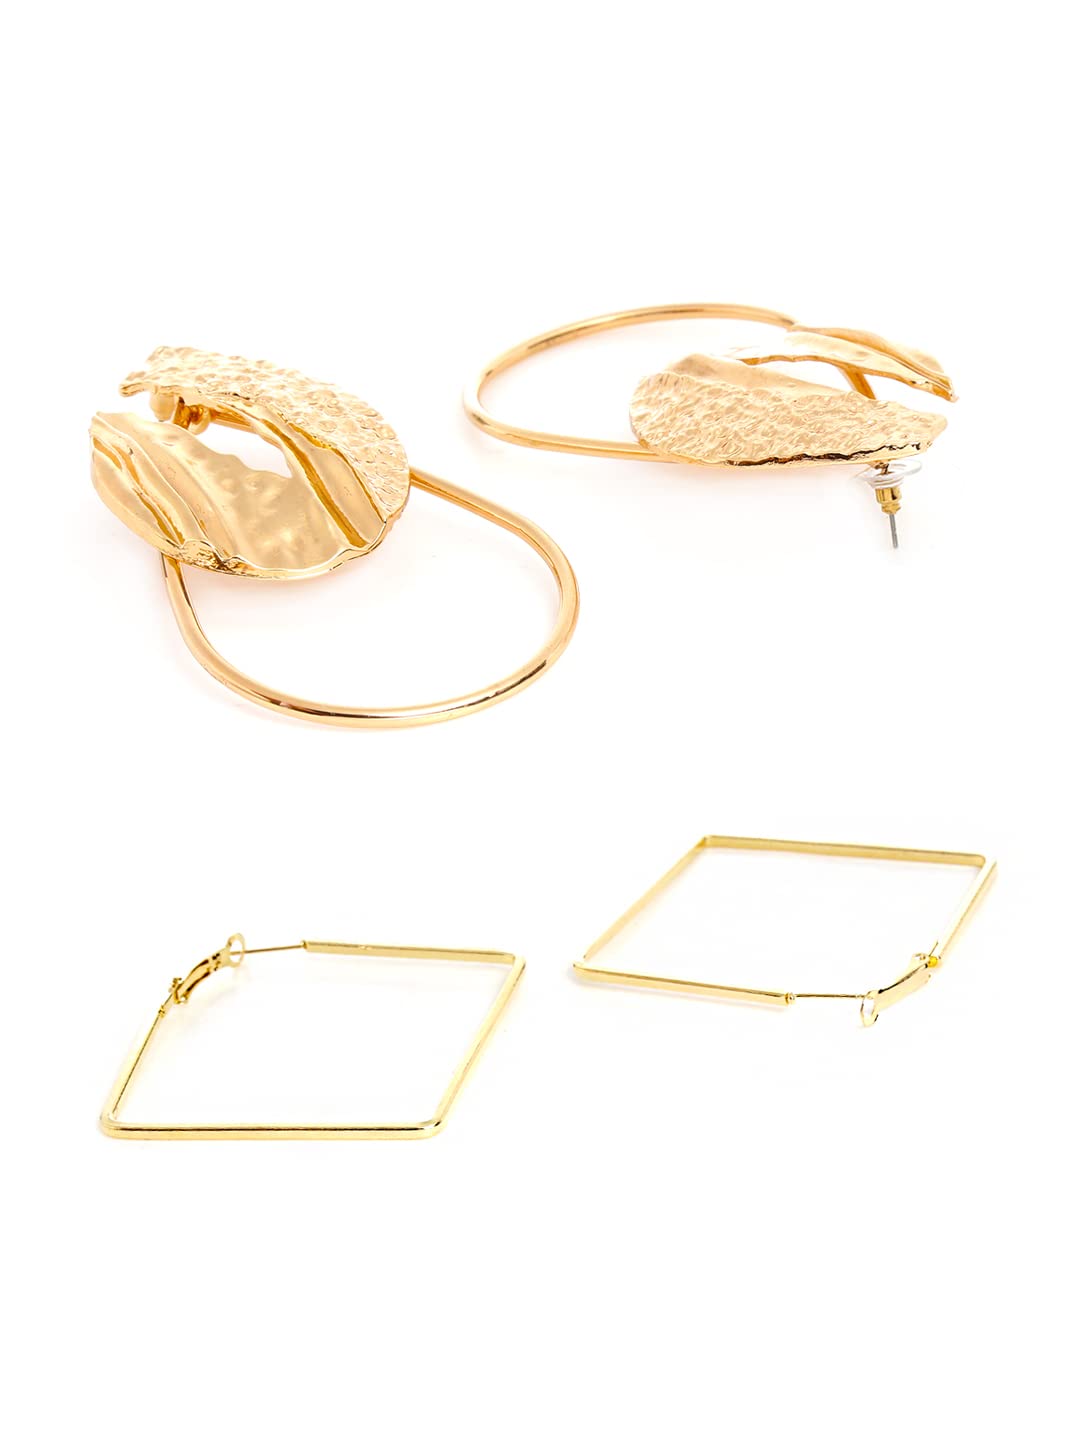 Yellow Chimes Combo of 2 Pairs Latest Fashion Gold Plated Geometric Shape Square Round Design Hoop Earrings for Women and Girls, Medium (YCFJER-14GEOMTRC-C-GL)